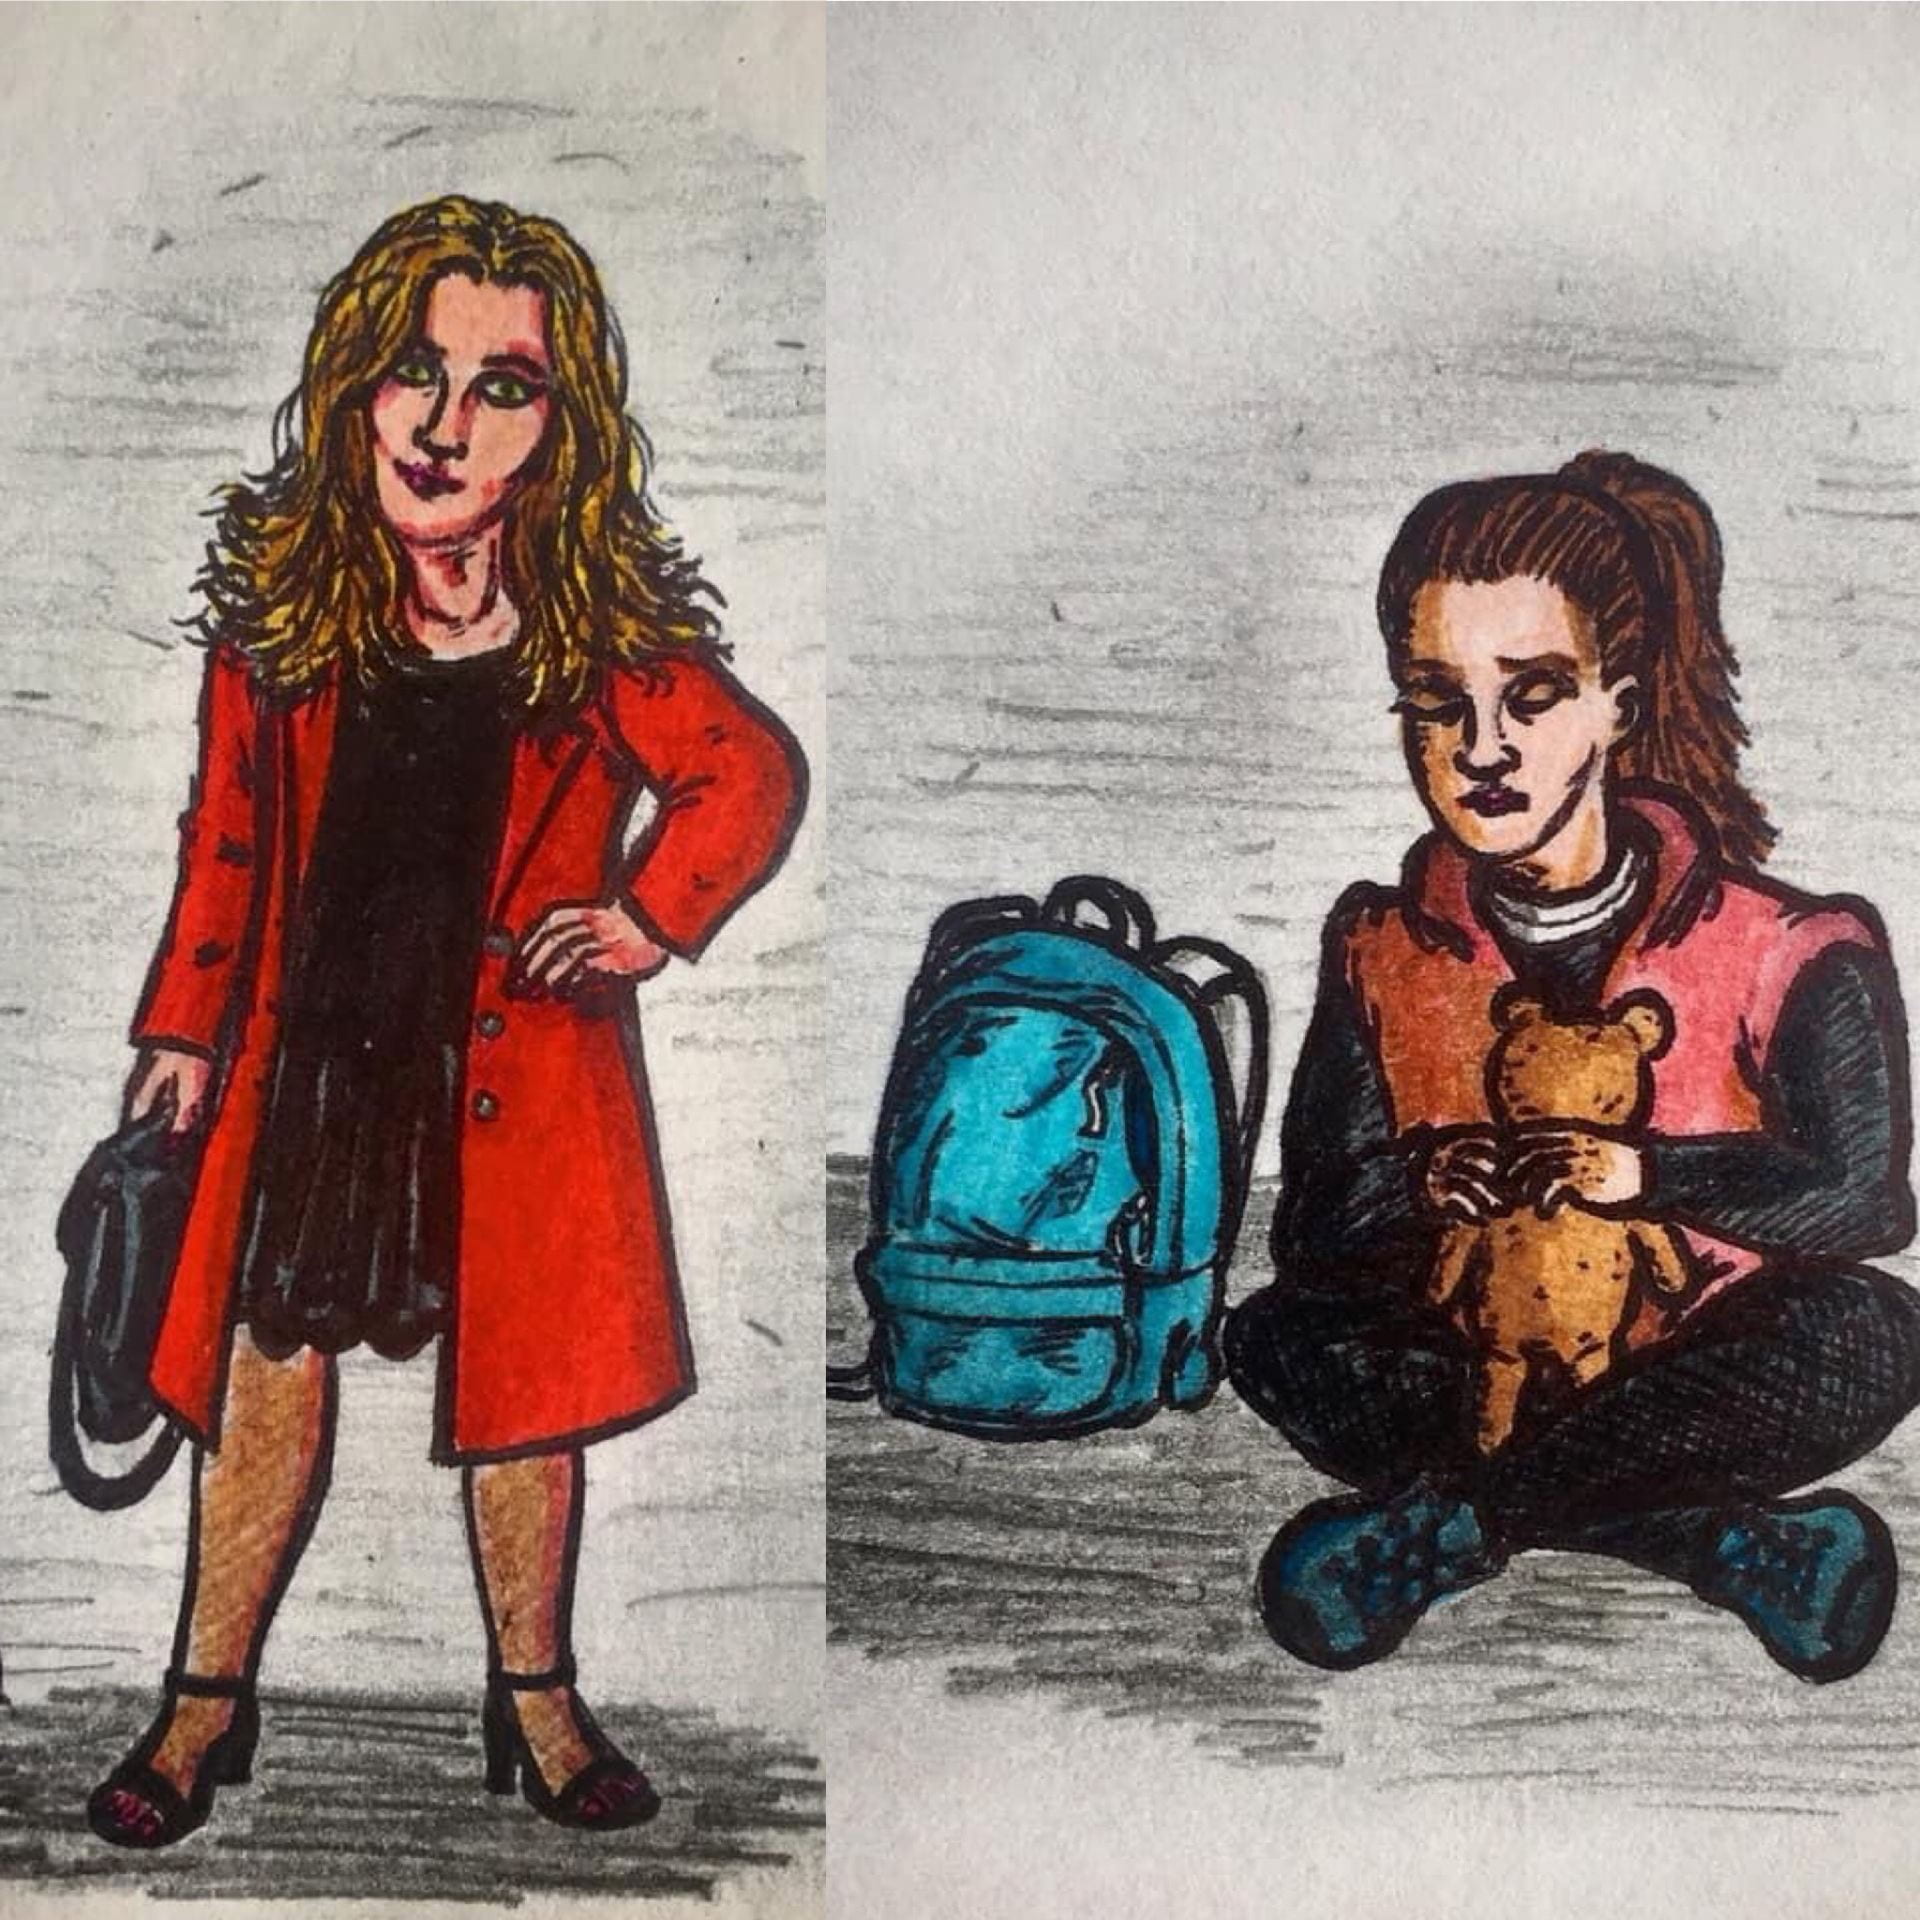 Drawings of characters; Sam & Leila. Created by James Bell.